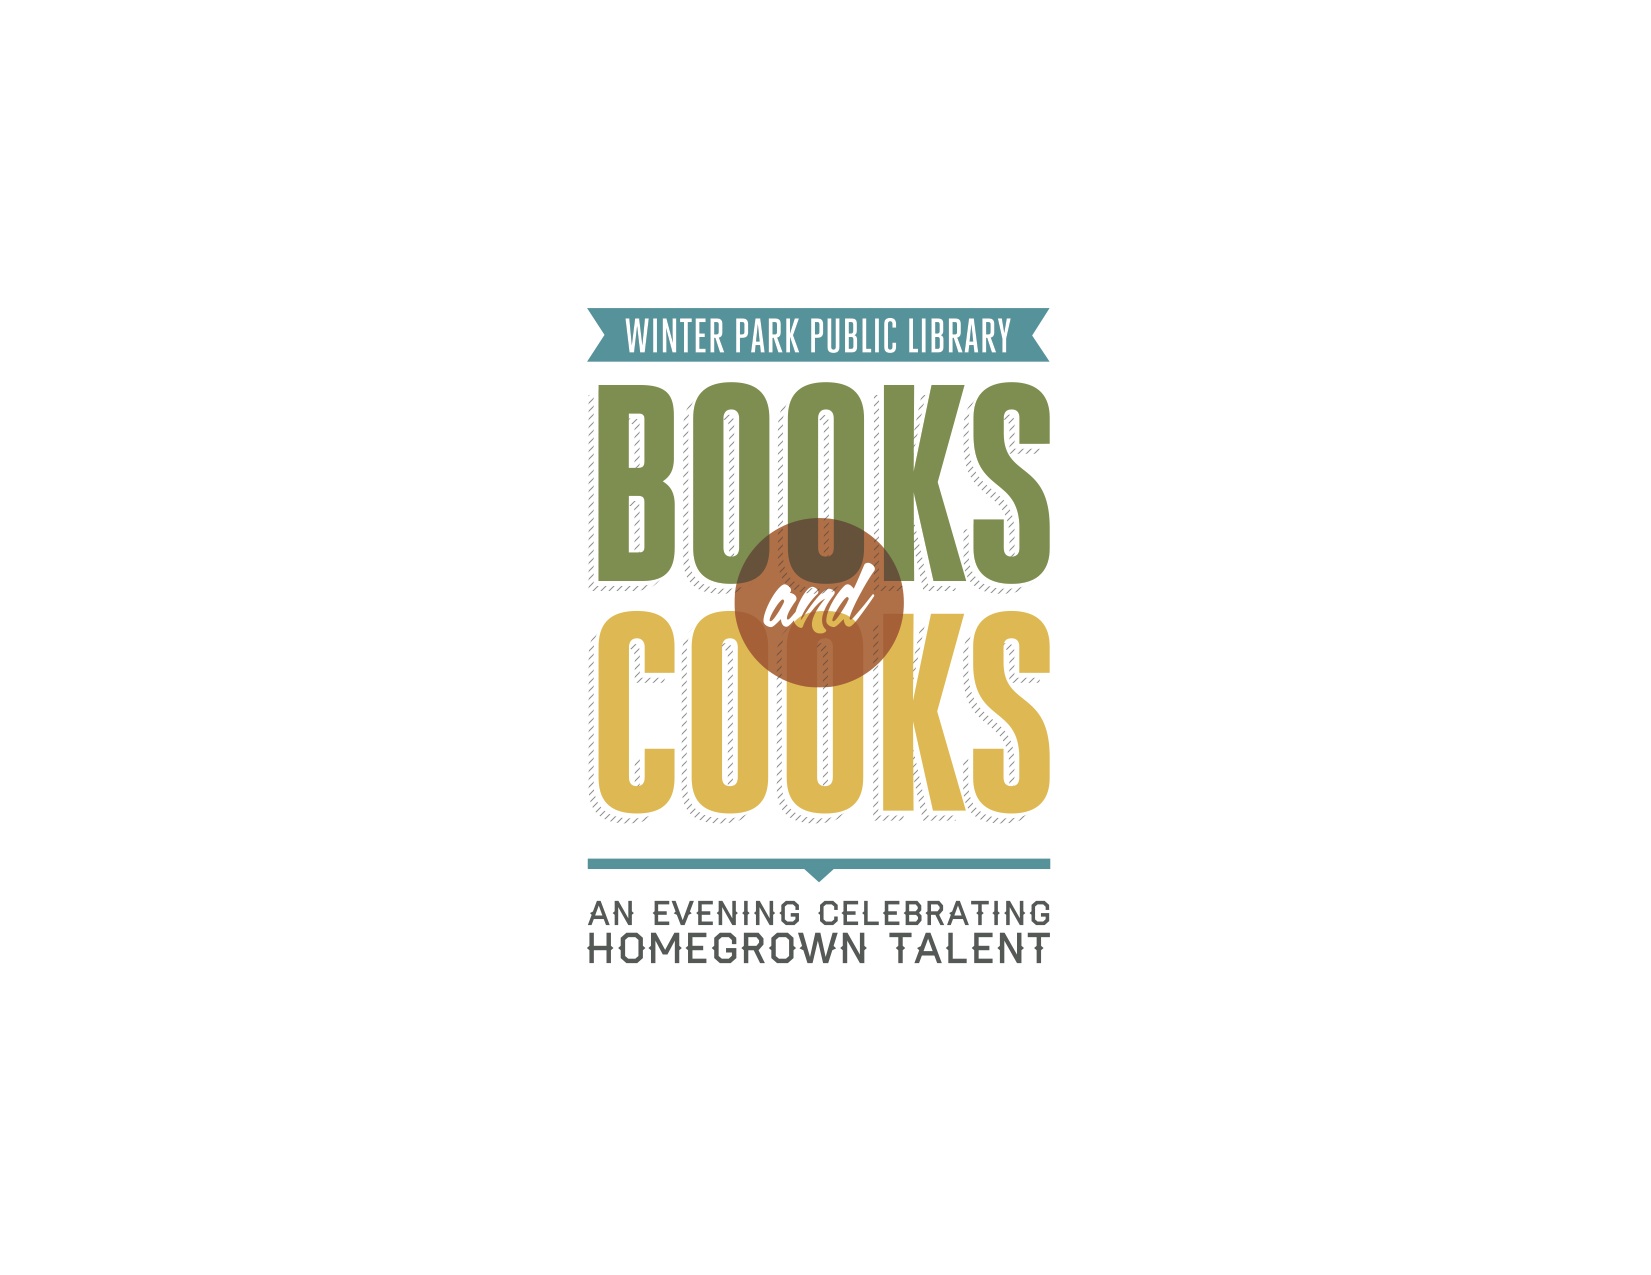 Books and Cooks: An Evening Celebrating Homegrown Talent presented by the Winter Park Public Library